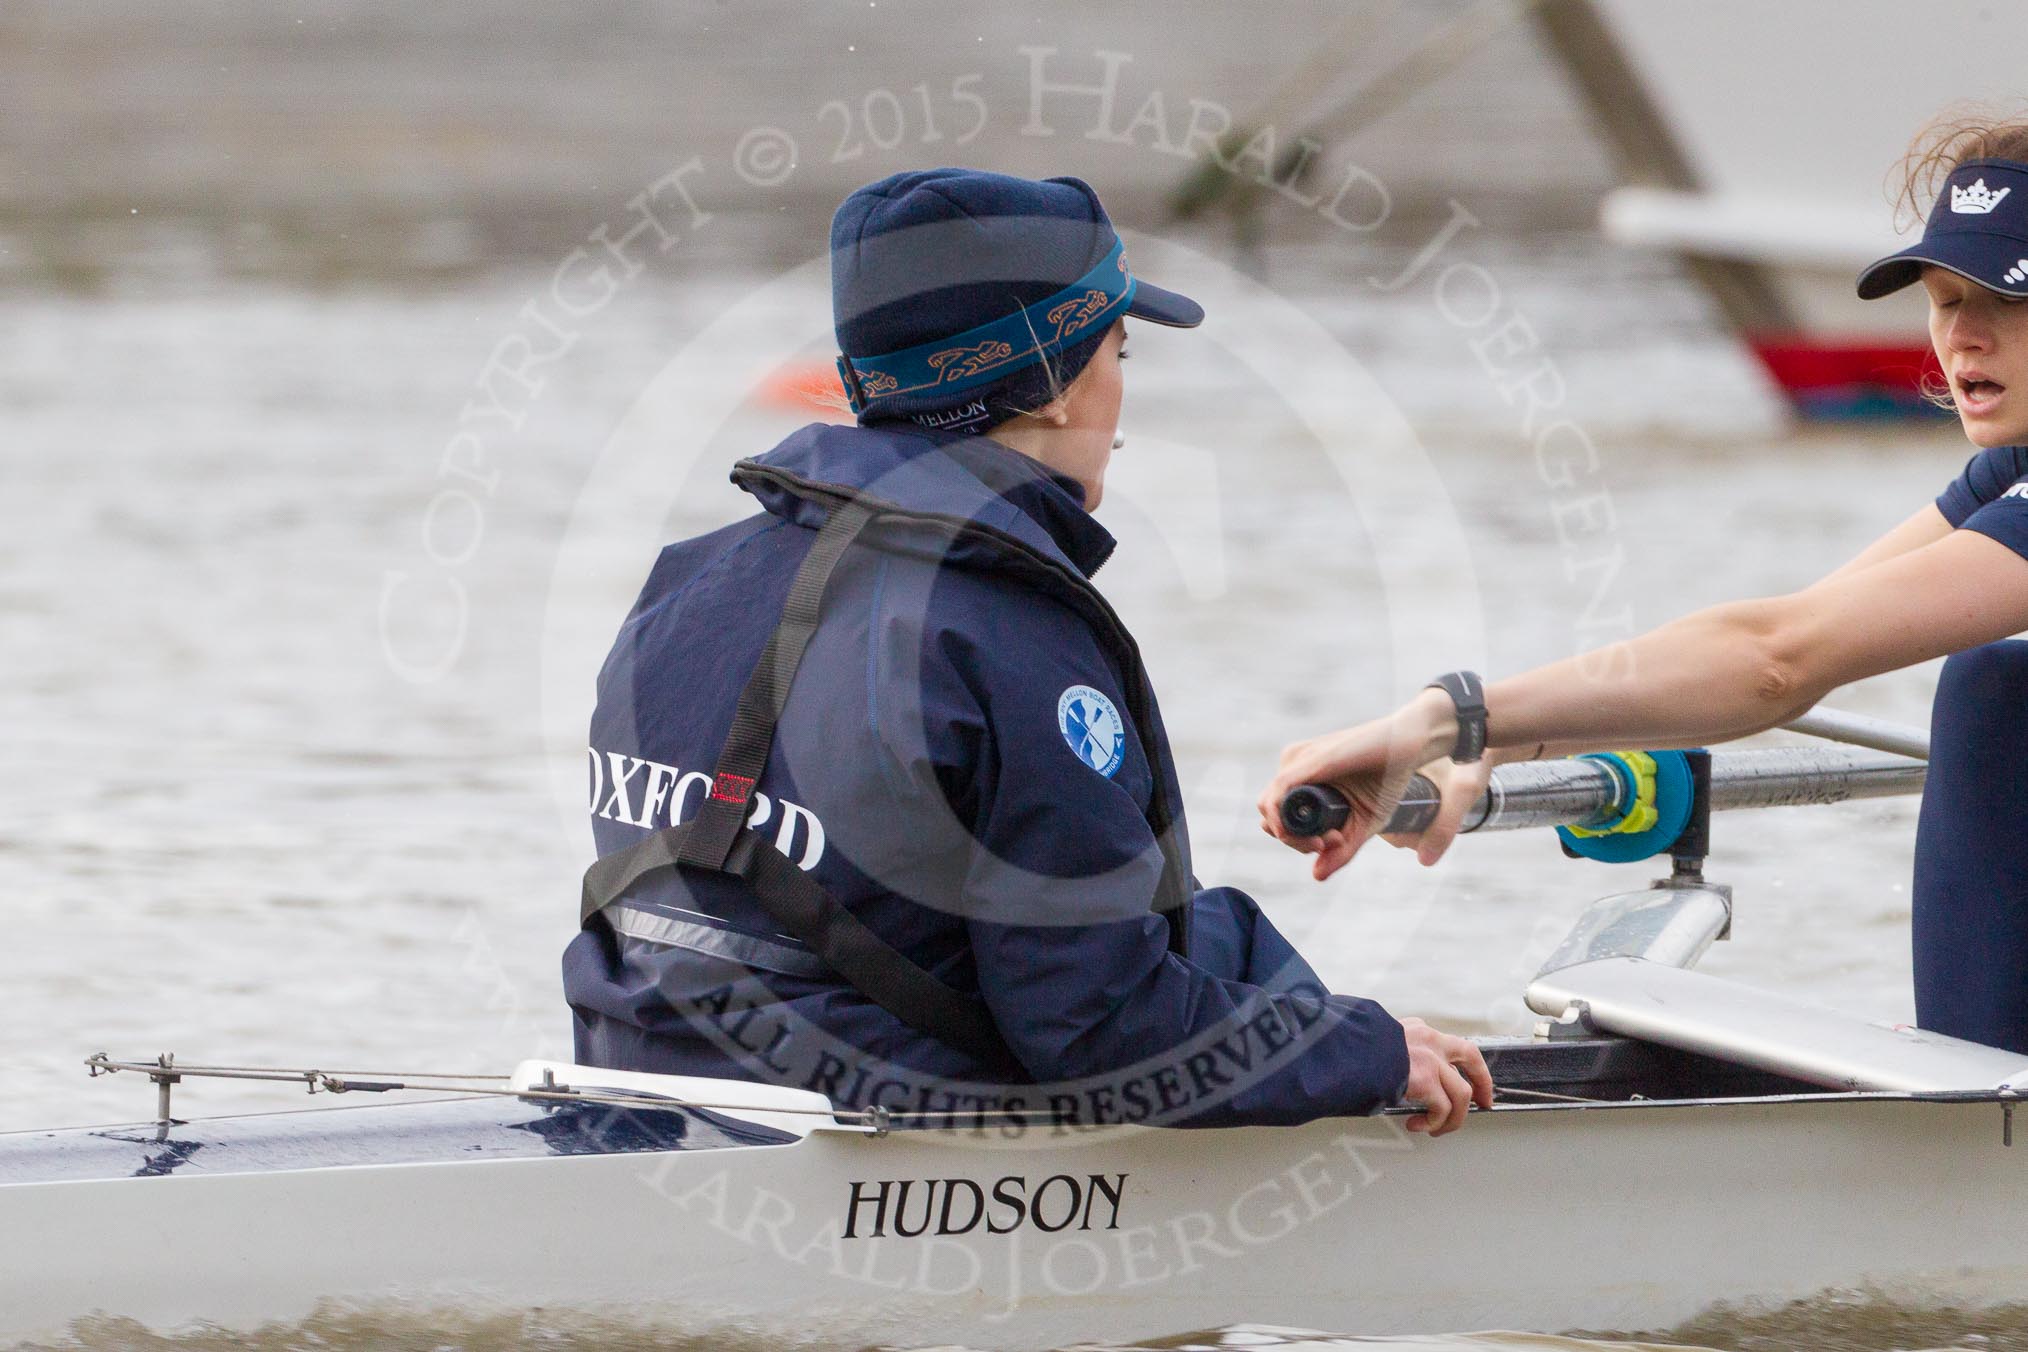 The Boat Race season 2016 - Women's Boat Race Trial Eights (OUWBC, Oxford): "Scylla", here cox-Antonia Stutter, stroke-Emma Lukasiewicz.
River Thames between Putney Bridge and Mortlake,
London SW15,

United Kingdom,
on 10 December 2015 at 12:19, image #154